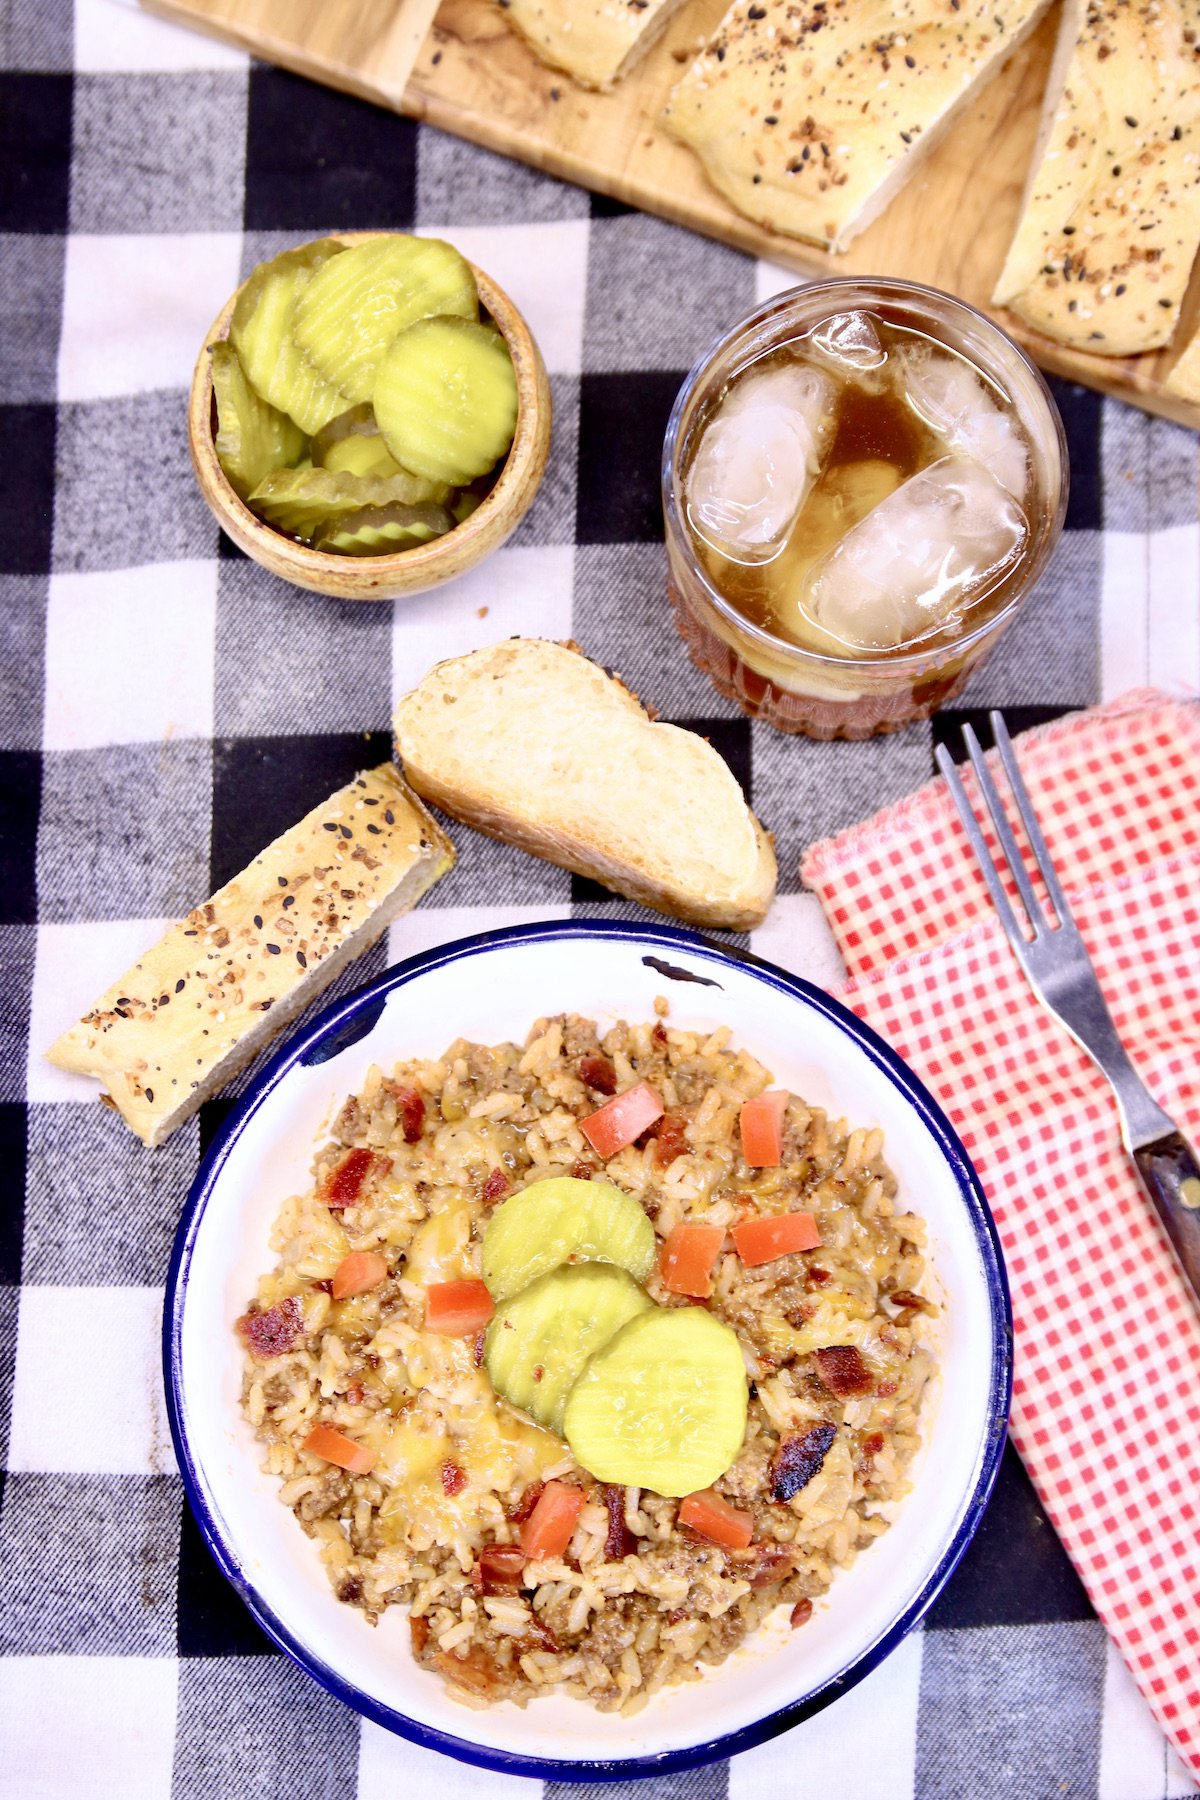 bacon cheeseburger rice in a bowl with pickles. Glass of tea, 2 slices of bread, pickles in a bowl.